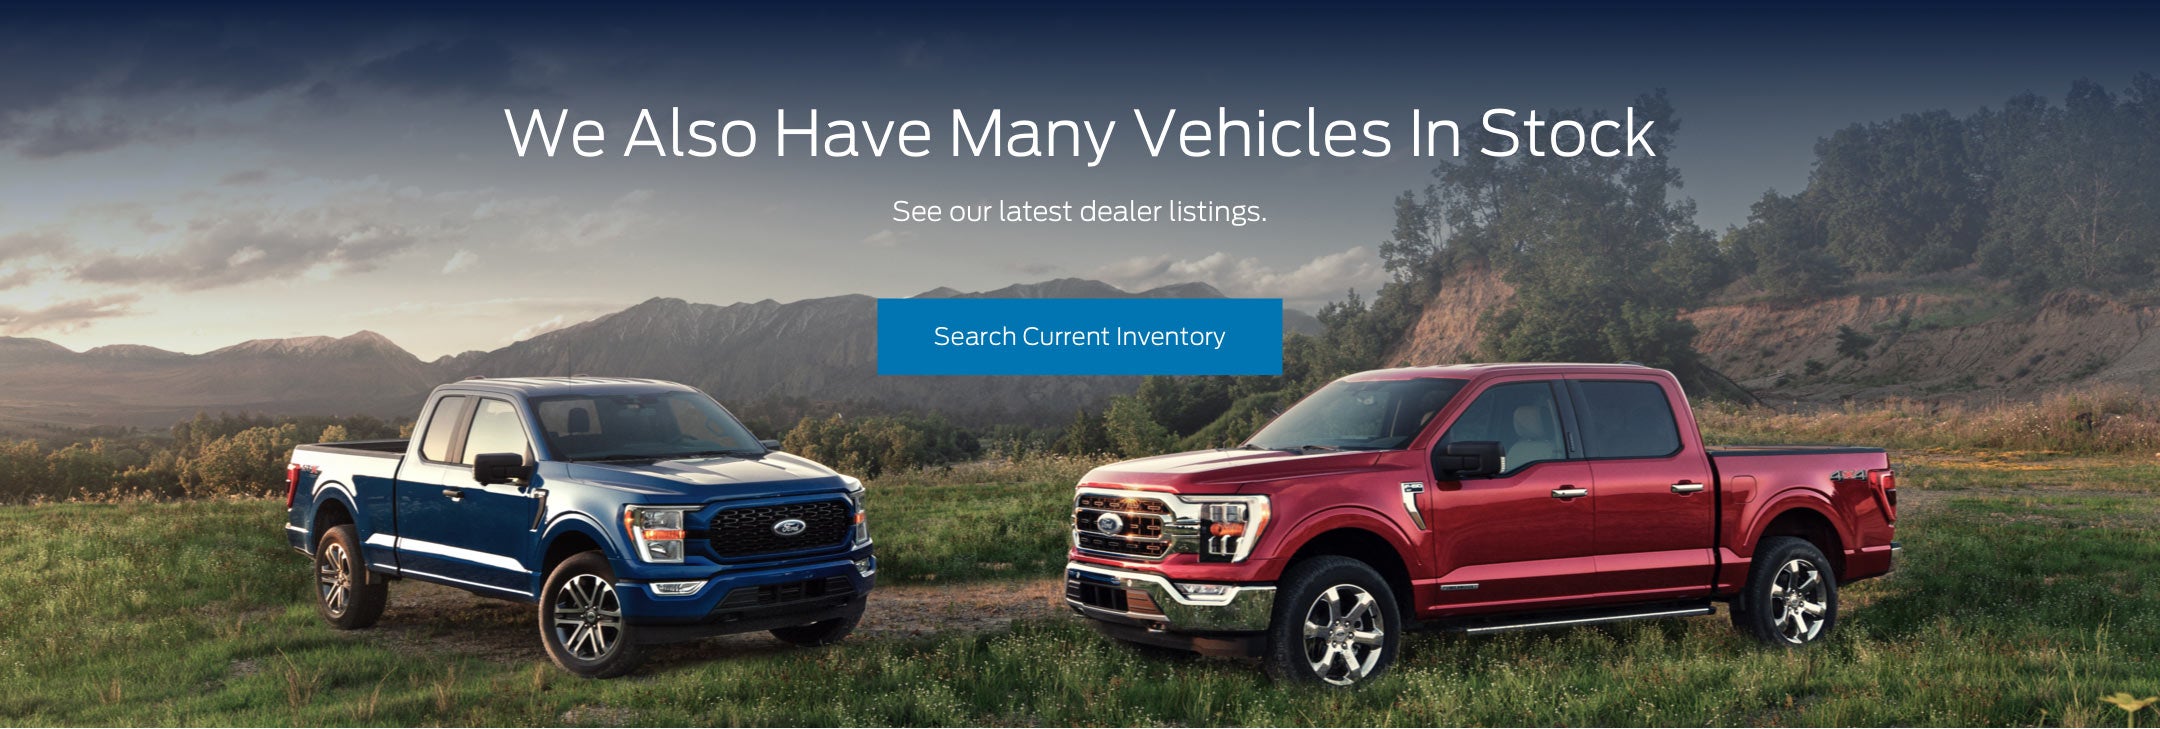 Ford vehicles in stock | Ed Sherling Ford Inc in Enterprise AL